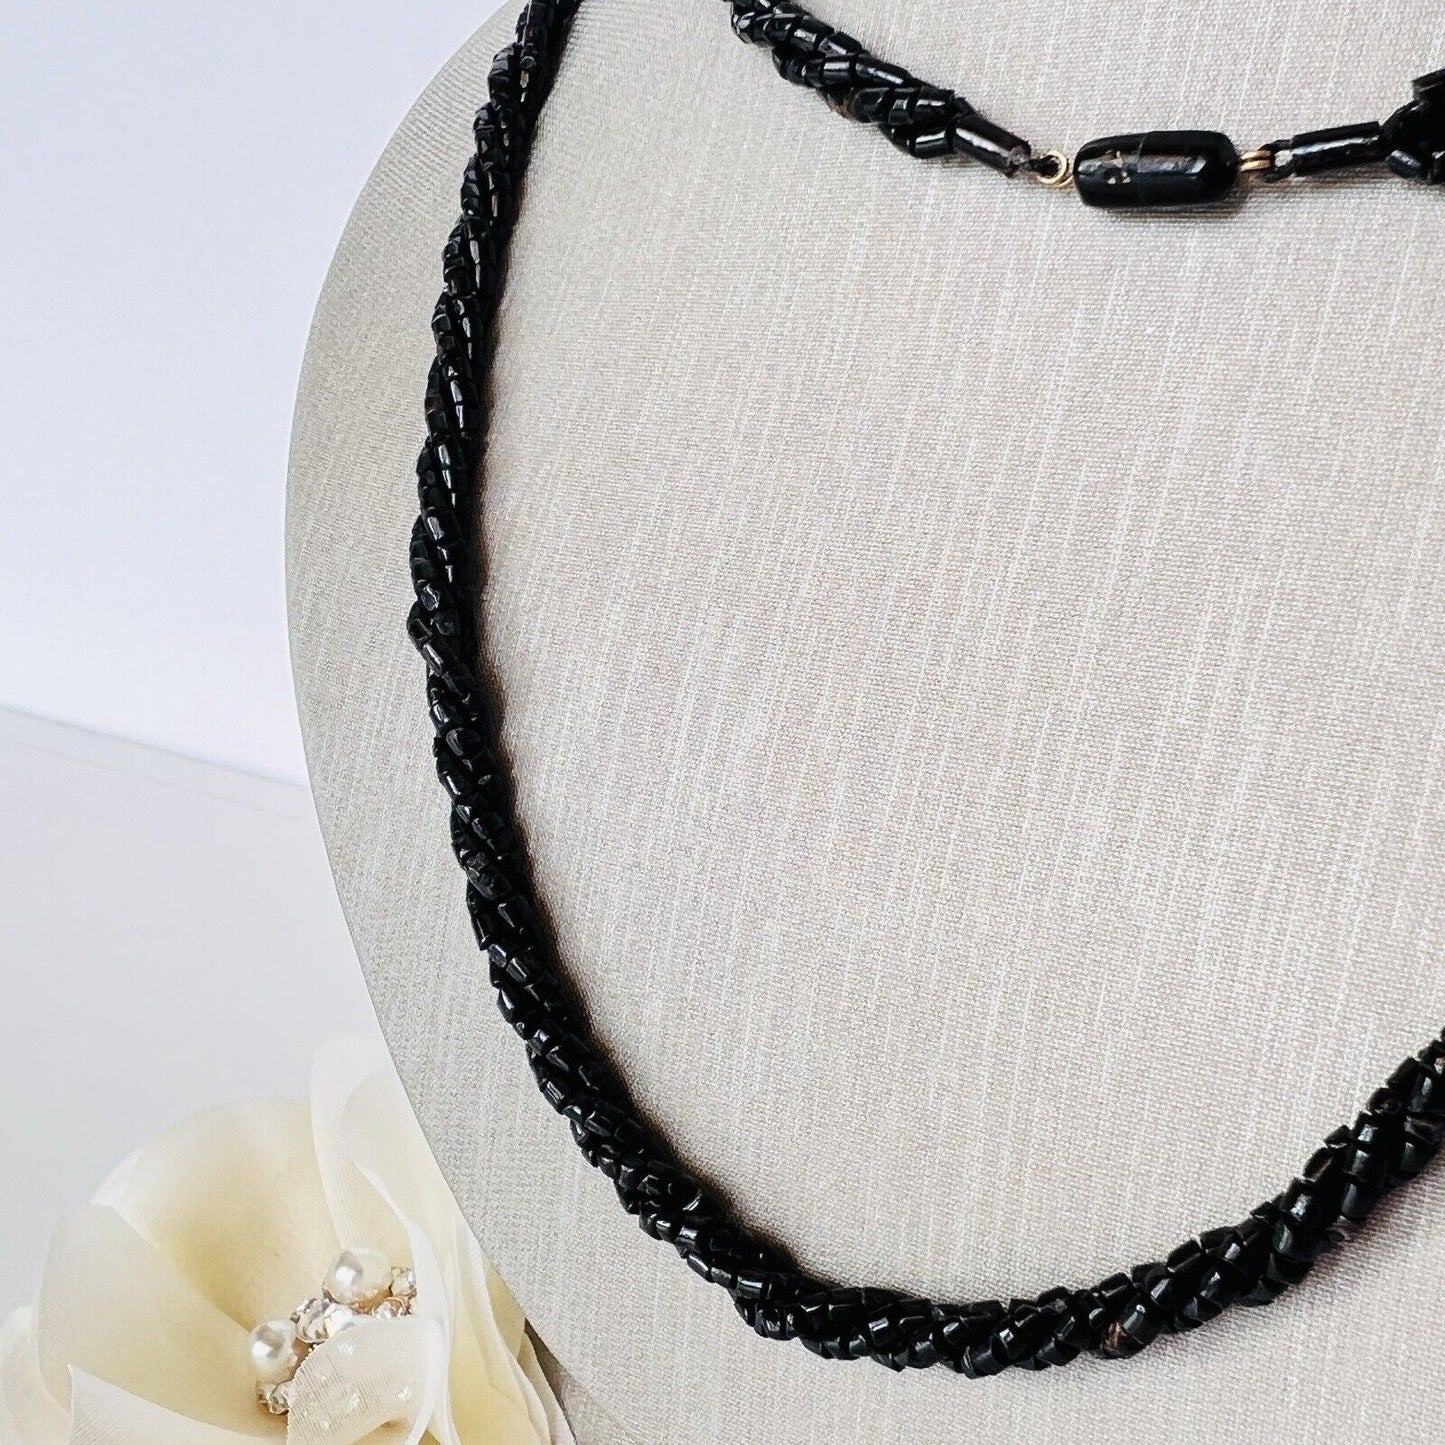 Vintage Handcrafted Genuine Black Coral 3-Row Twisted Rope Necklace, 34”